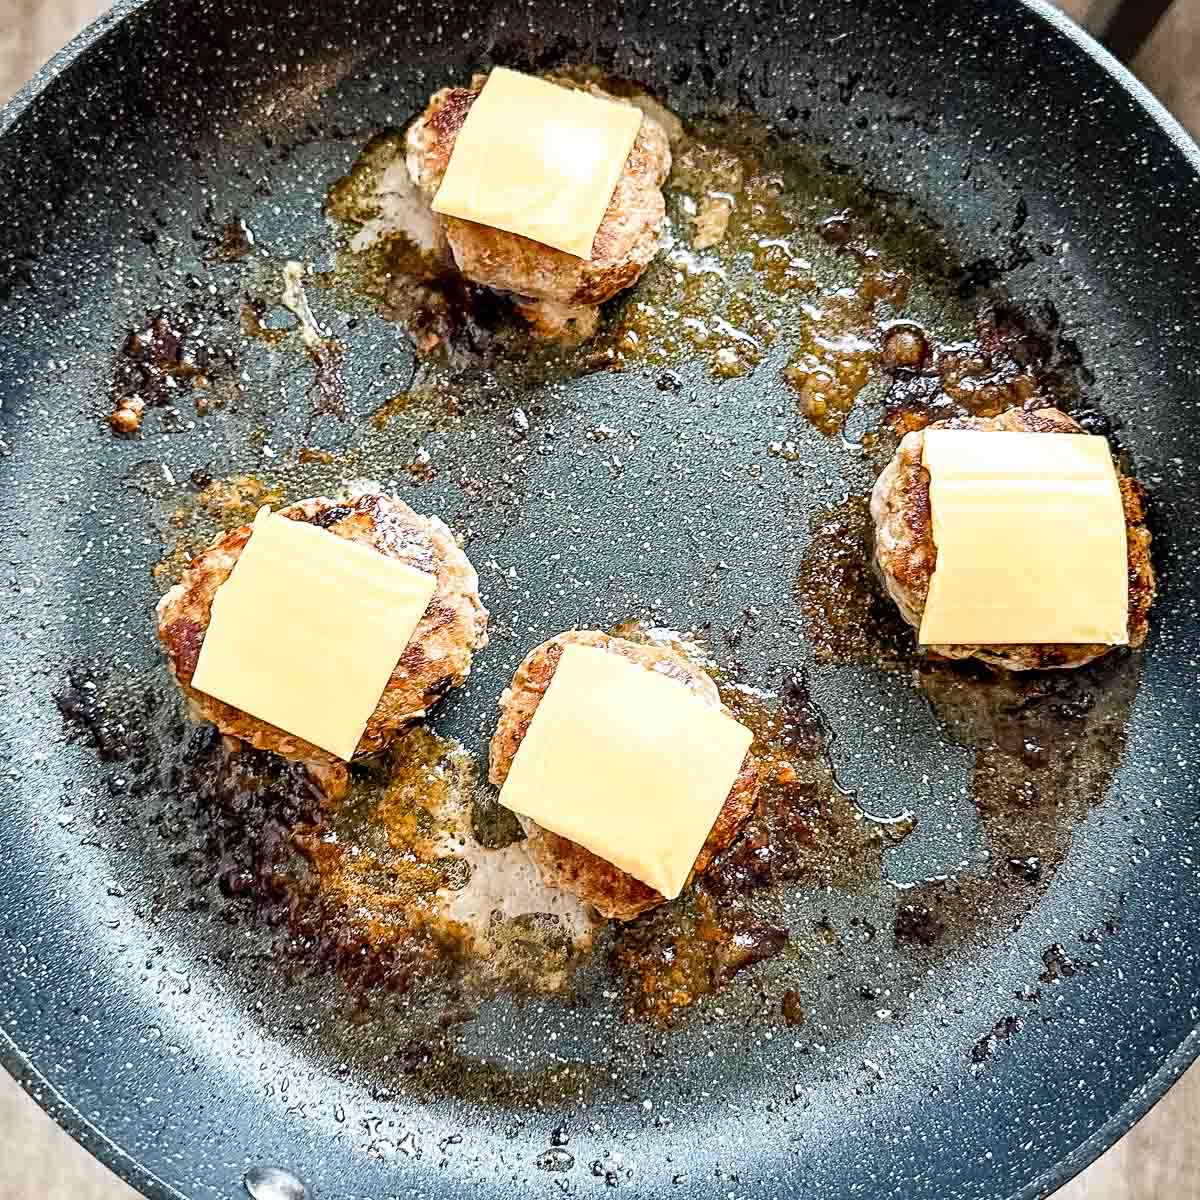 Turkey burger sliders topped with cheese in a frying pan.